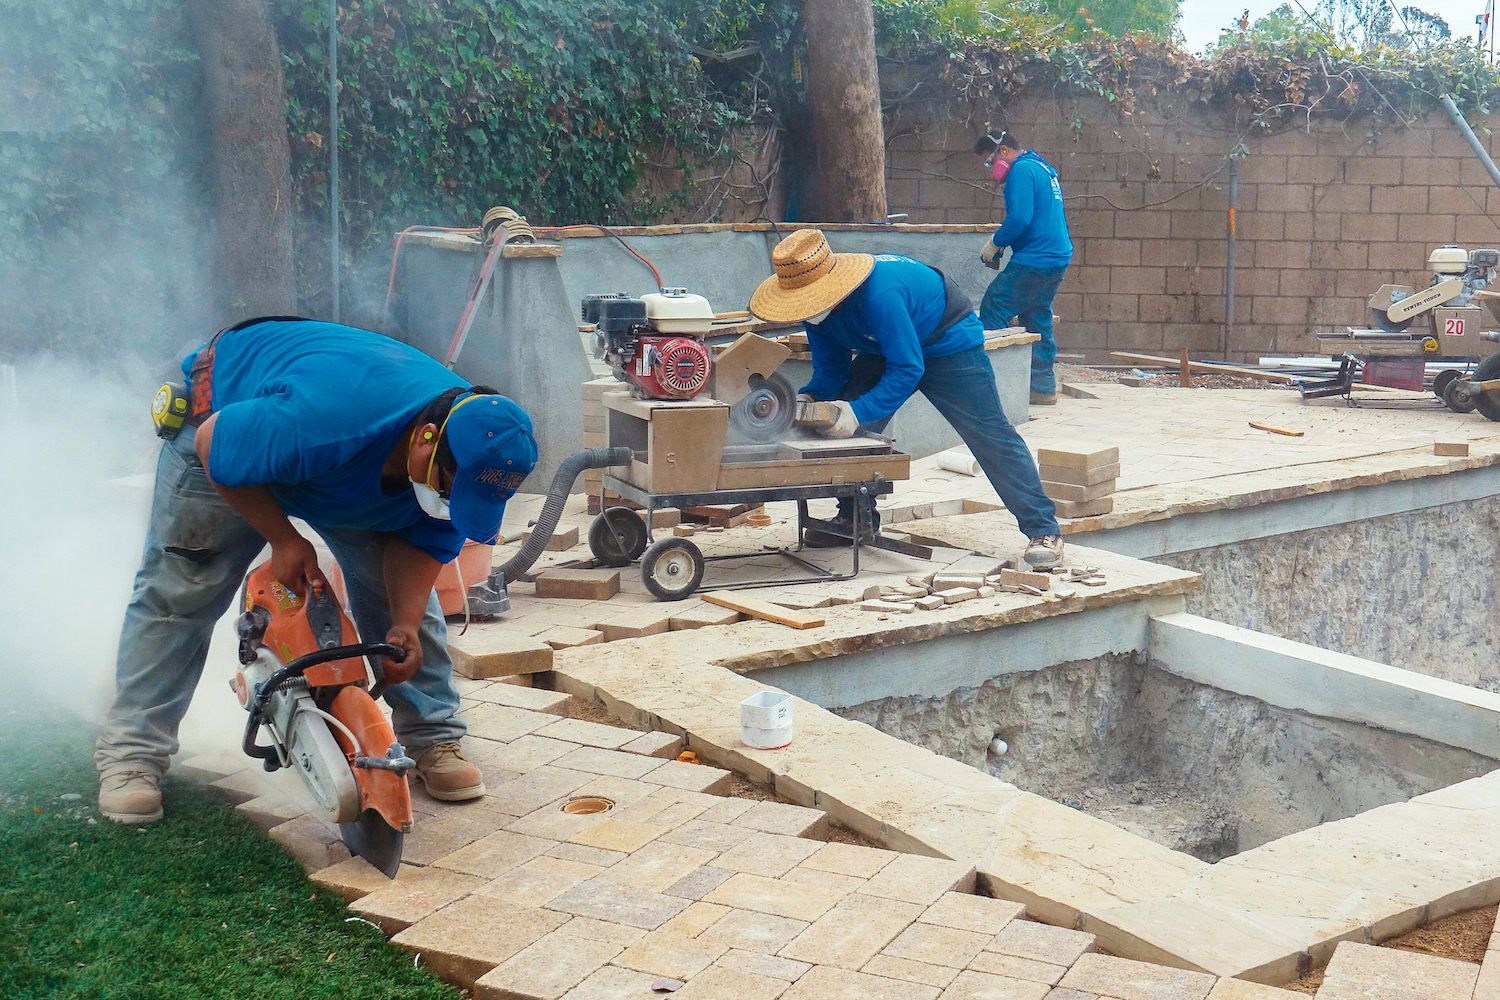 Certified Pavers from Rocket Estate Builders renovating a backyard pool area in Central Florida